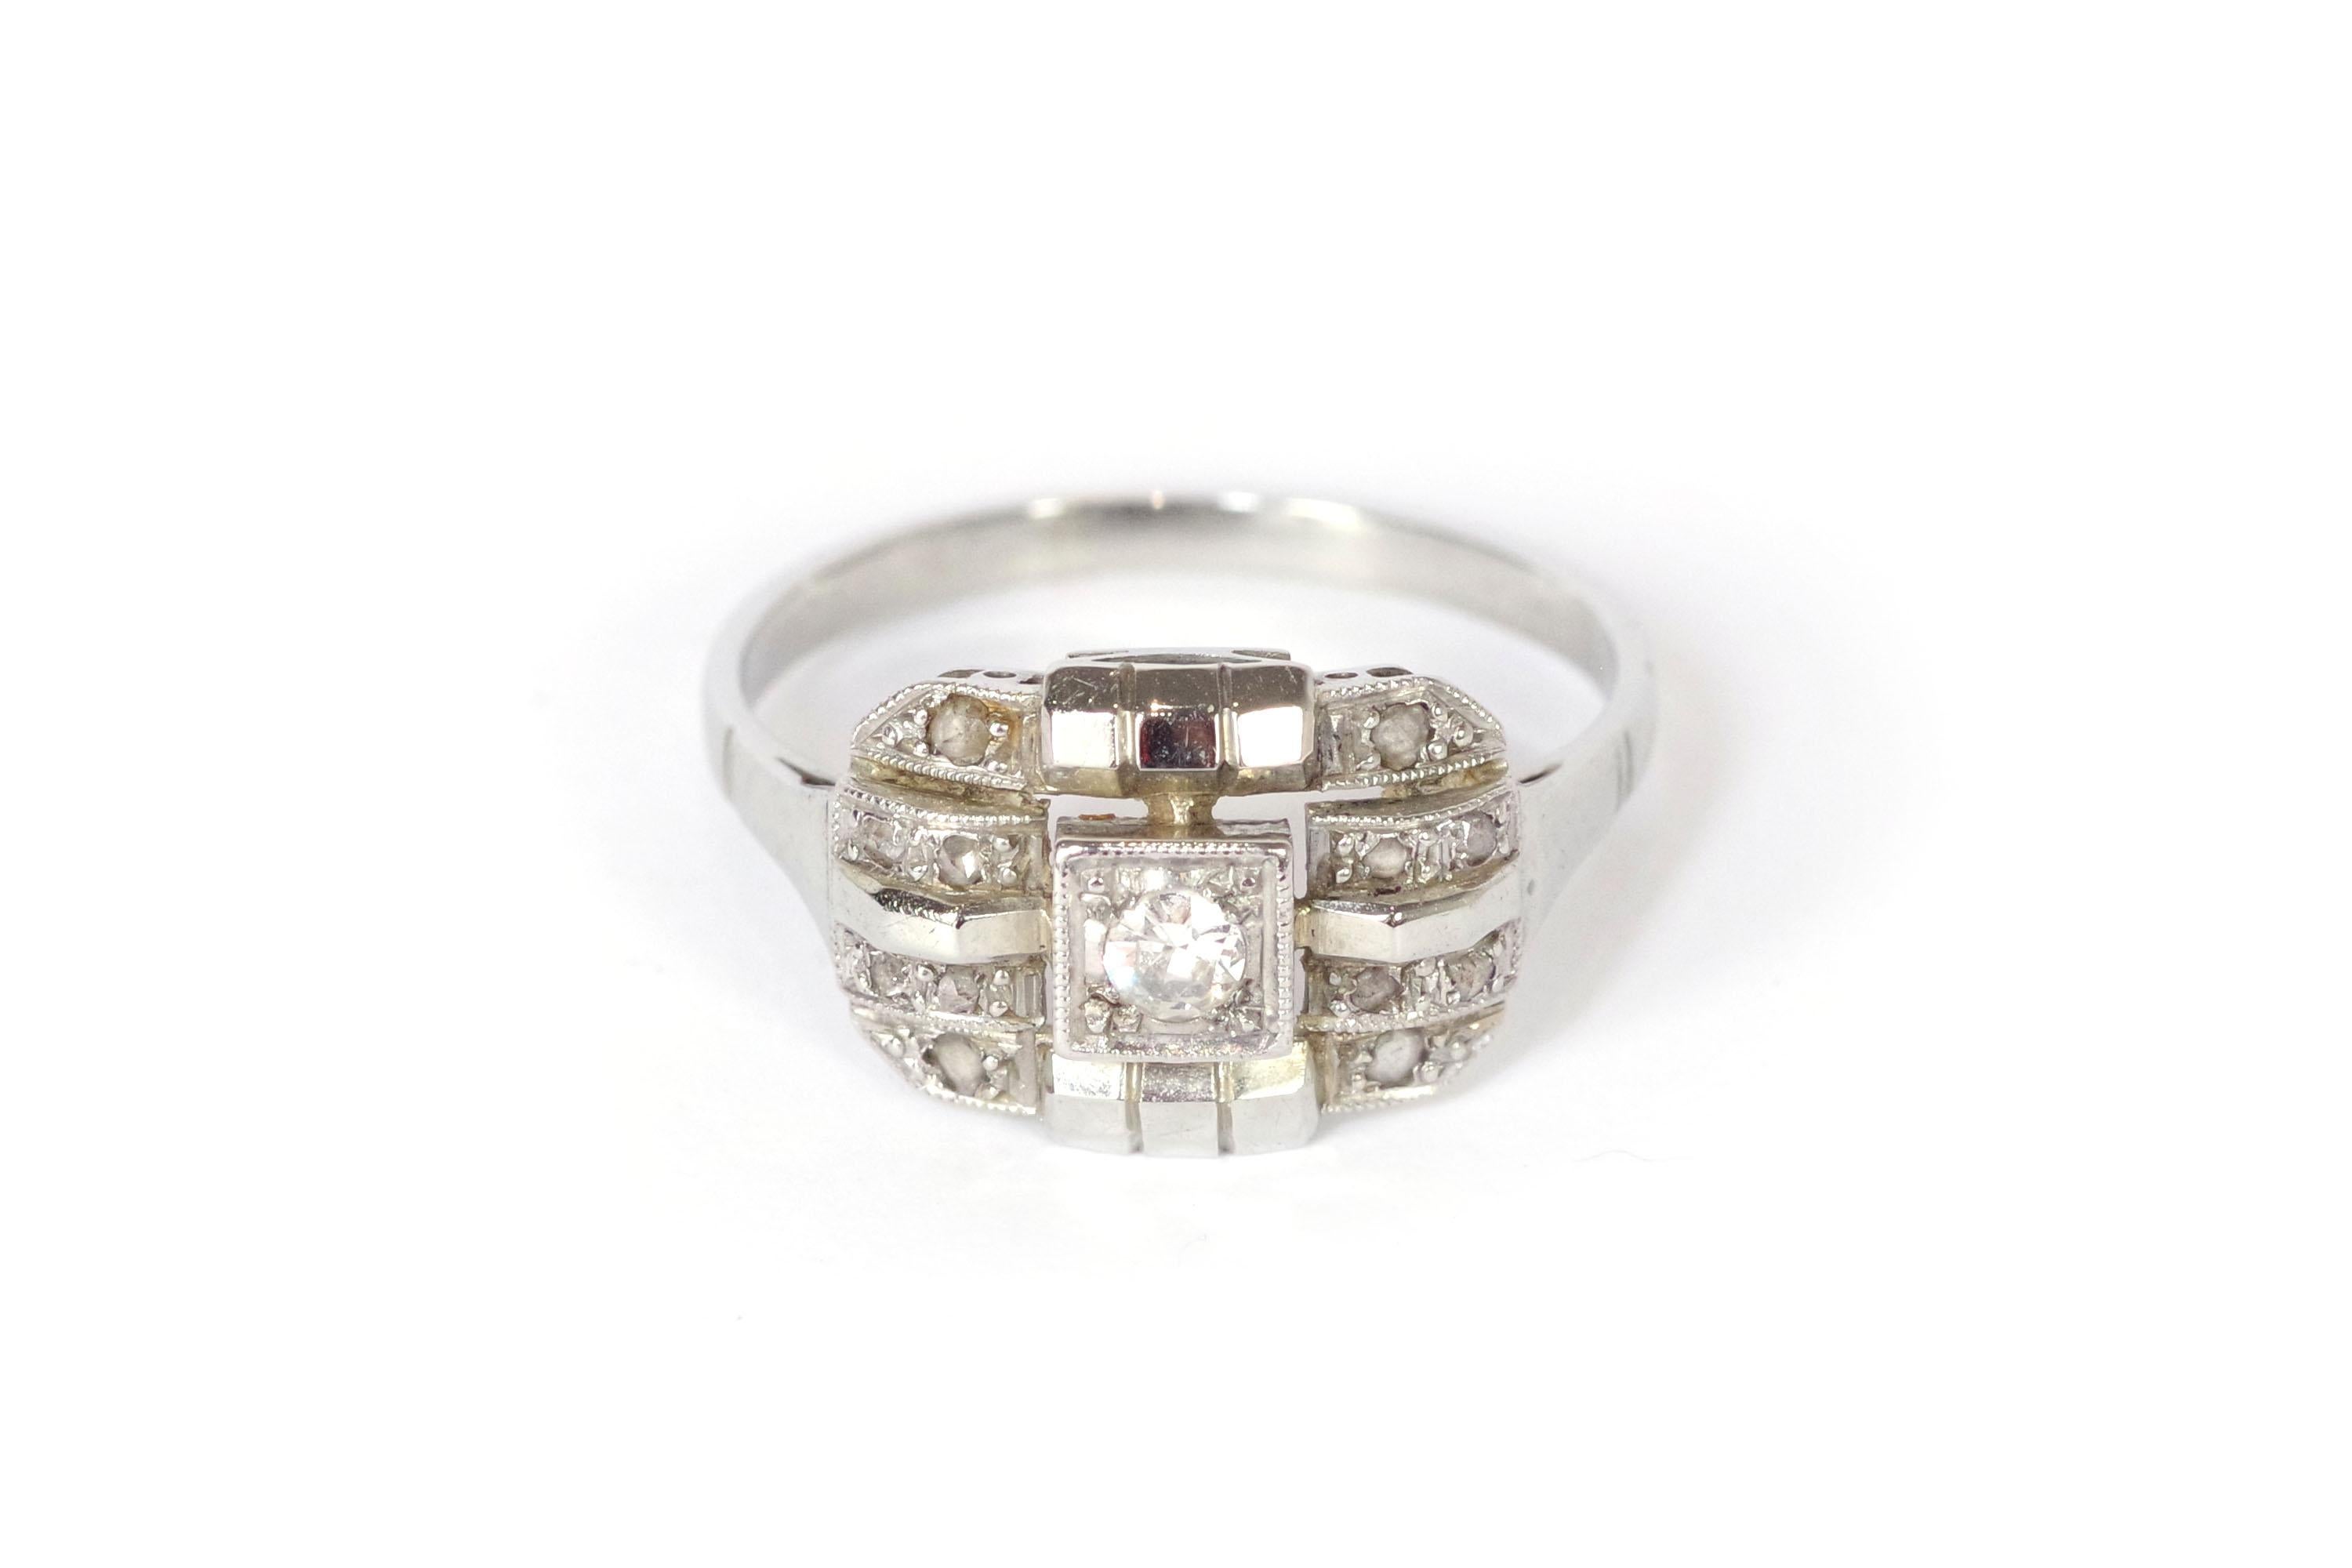 Art Deco diamond geometric ring in 18 karat white gold and platinum. This rectangular-shaped Art Deco ring is centered with a brilliant-cut diamond set within a square setting. The ring features geometric lines in gold, some polished and some